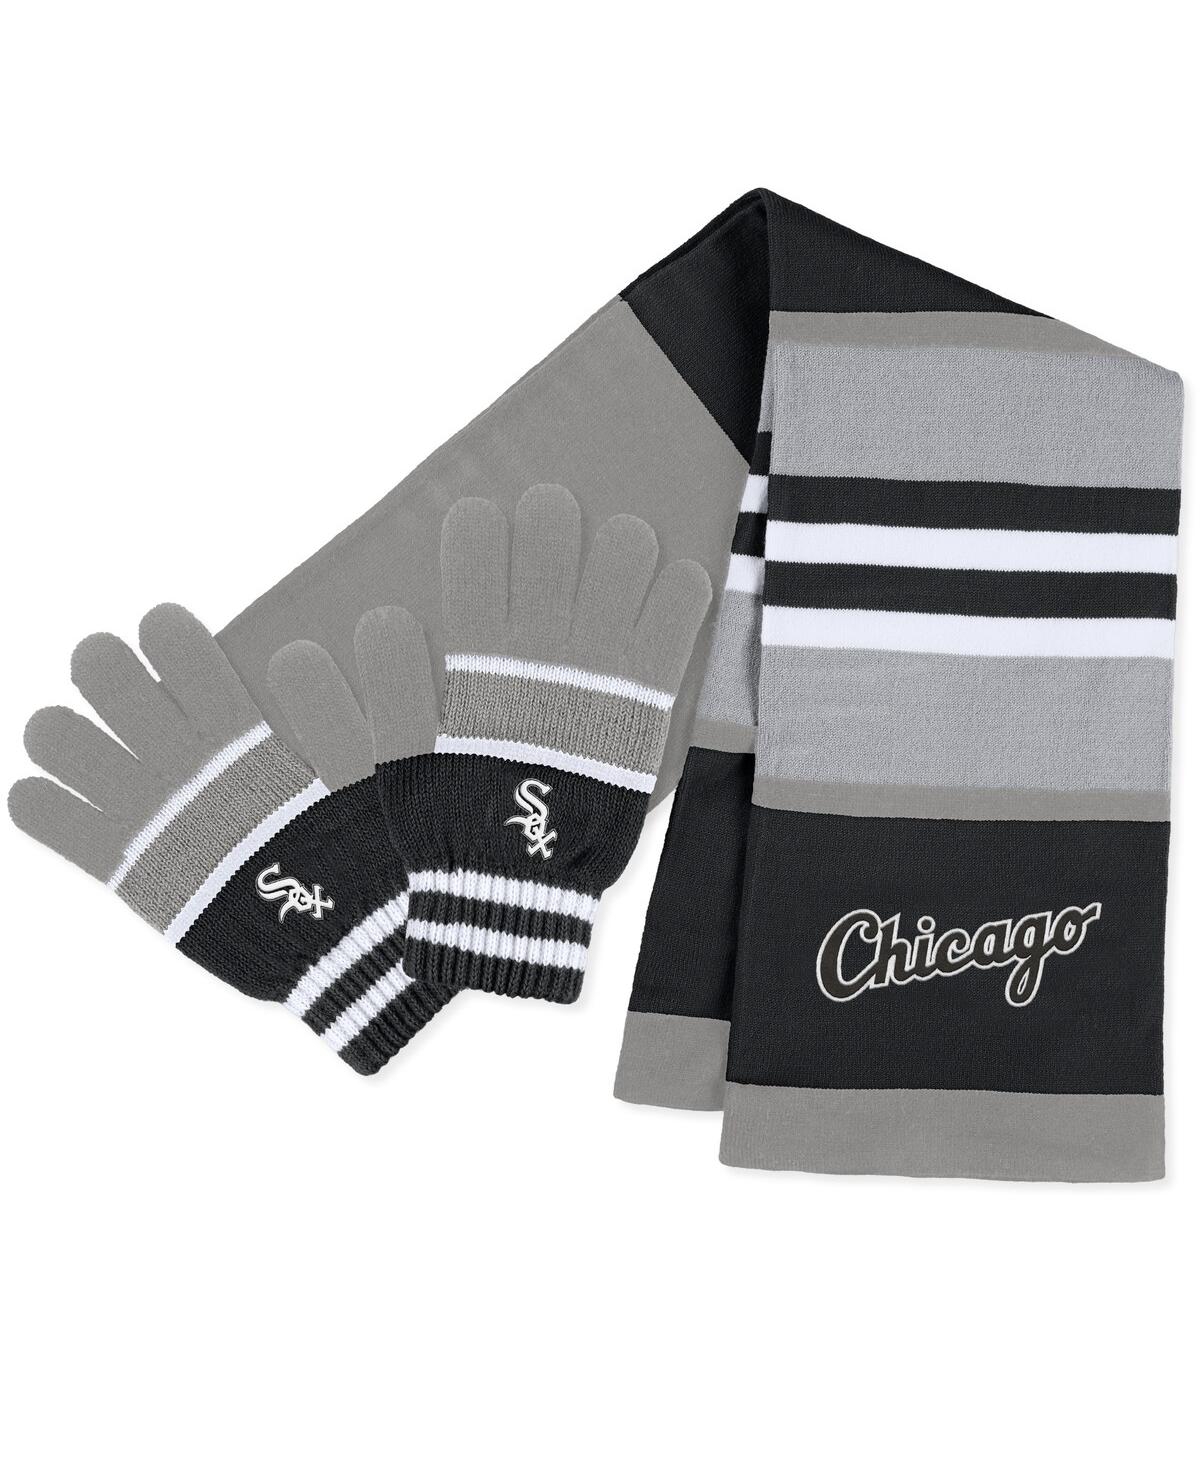 Wear By Erin Andrews Women's  Chicago White Sox Stripe Glove And Scarf Set In Black,gray